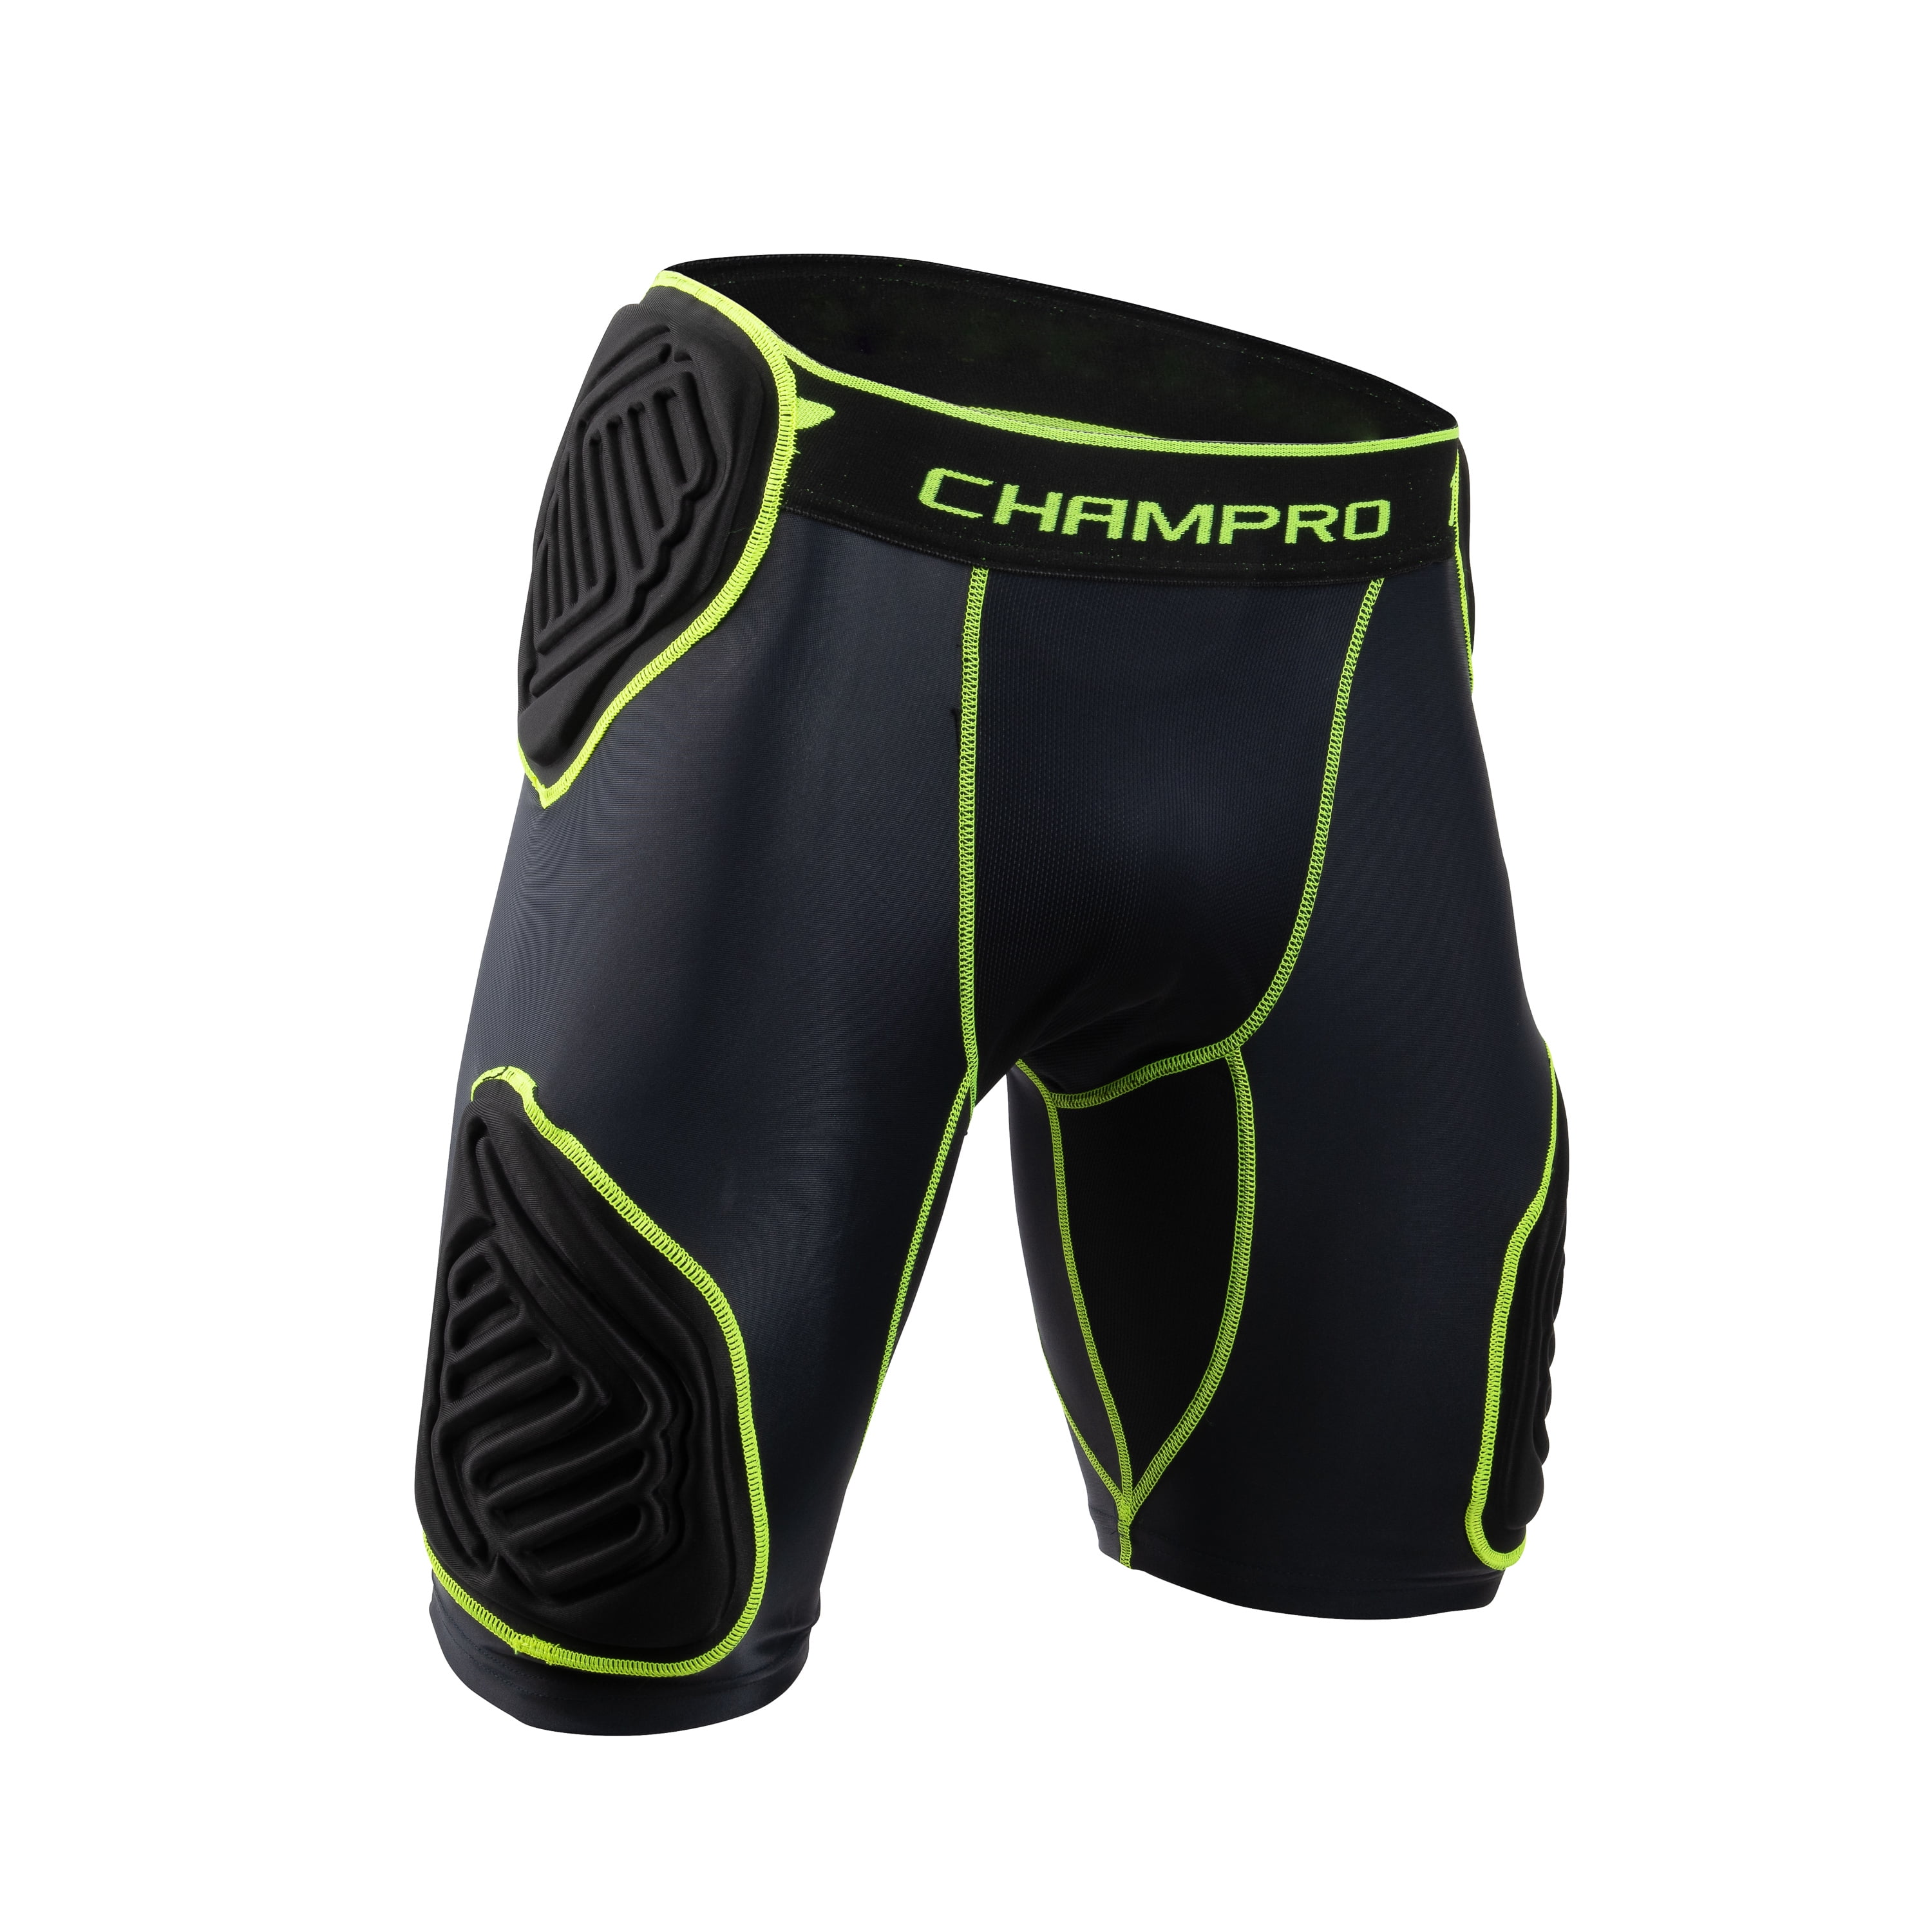 Champro Bull-Rush 7-Pad 3/4 Pants Football Girdle /w Pads Adult or Youth FPGU17 